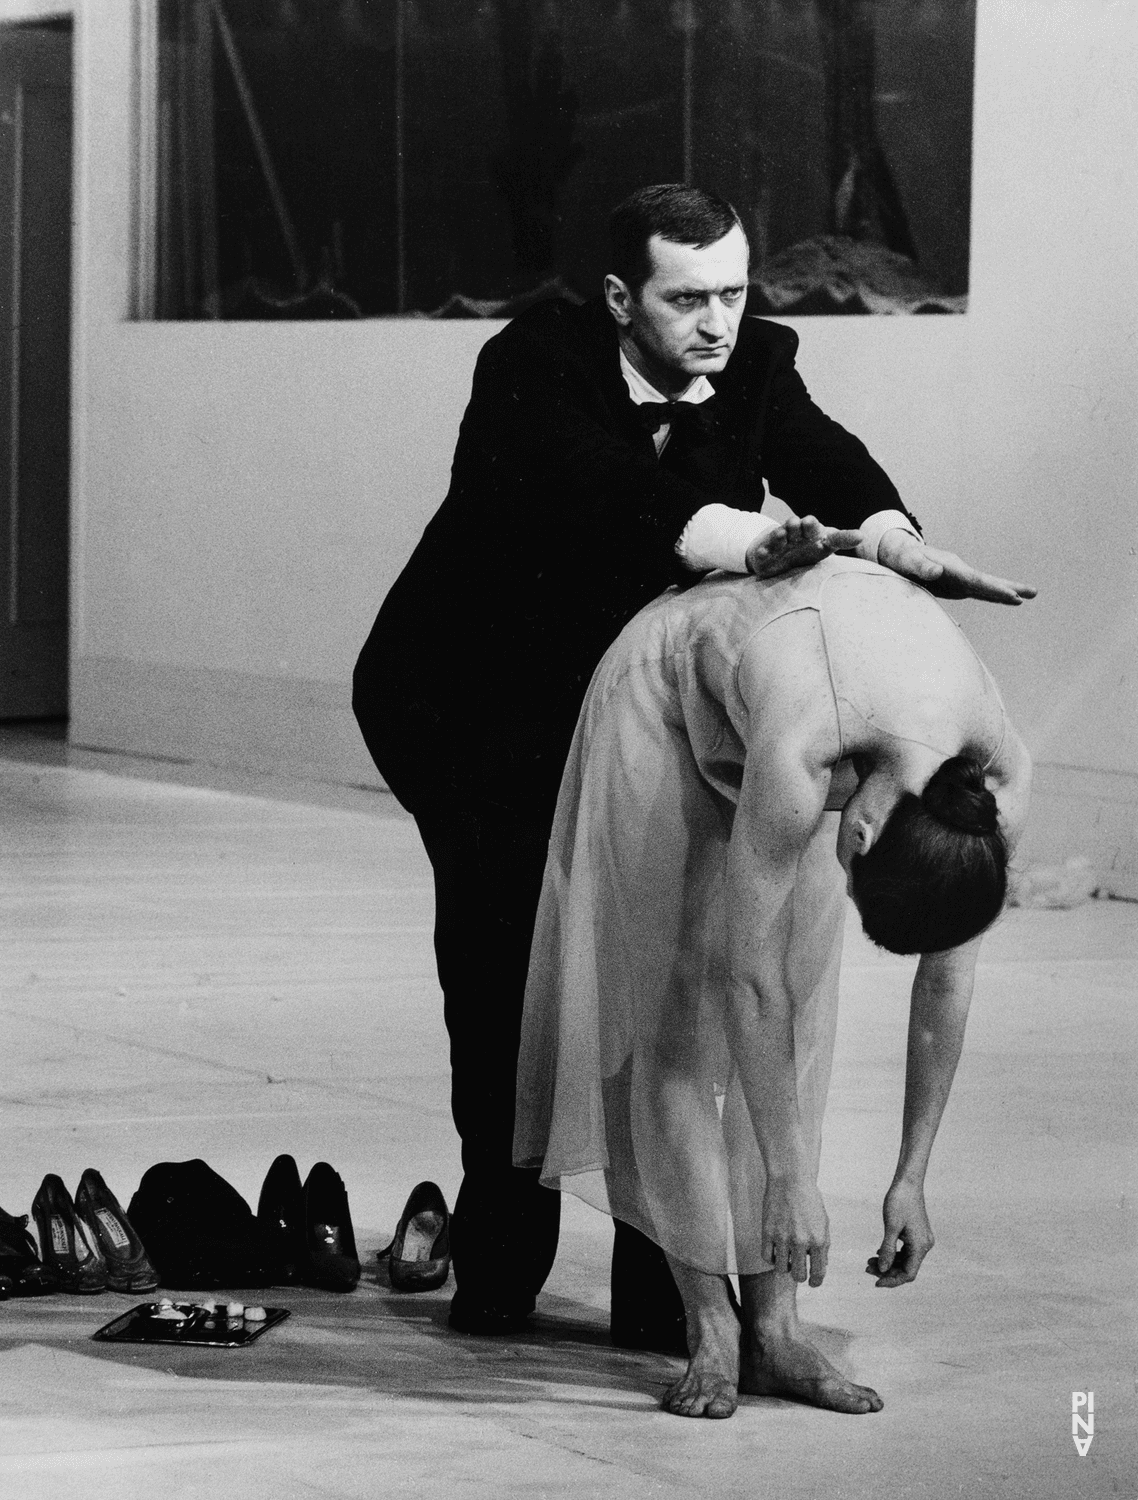 Josephine Ann Endicott and Jan Minařík in “Two Cigarettes in the Dark” by Pina Bausch